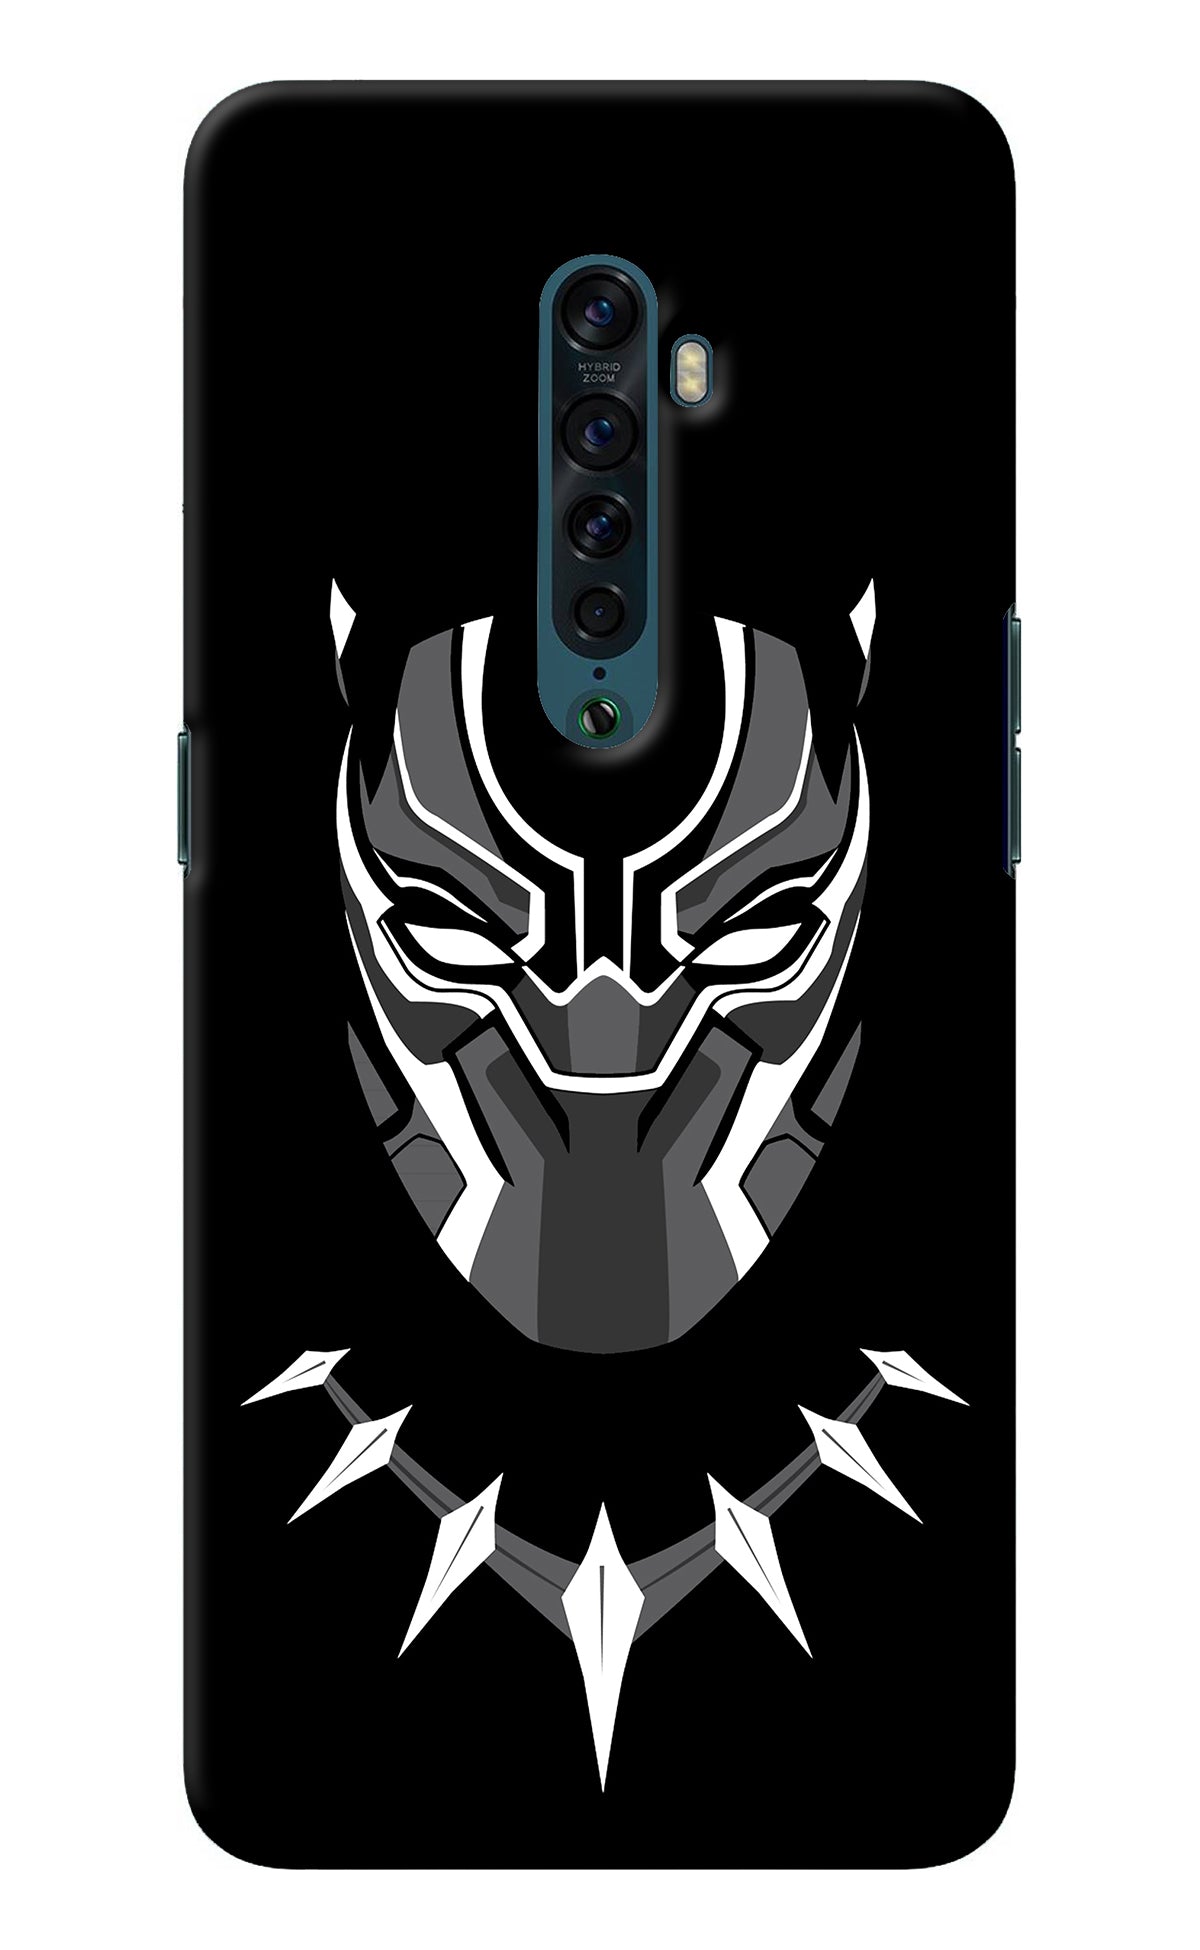 Black Panther Oppo Reno2 Back Cover